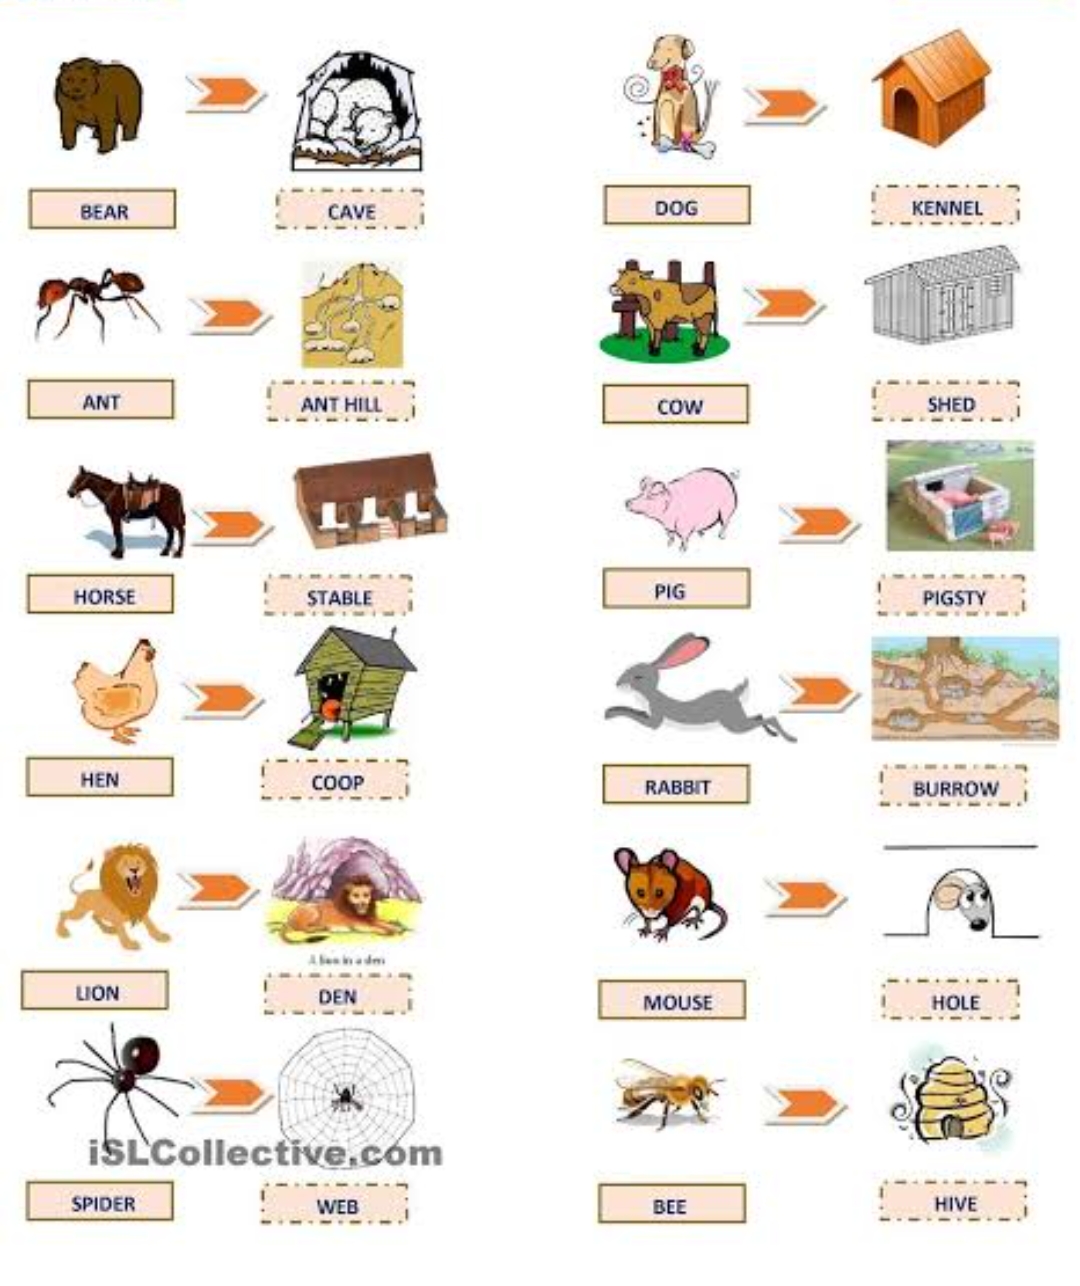 Animal And Their Homes - English - Notes - Teachmint